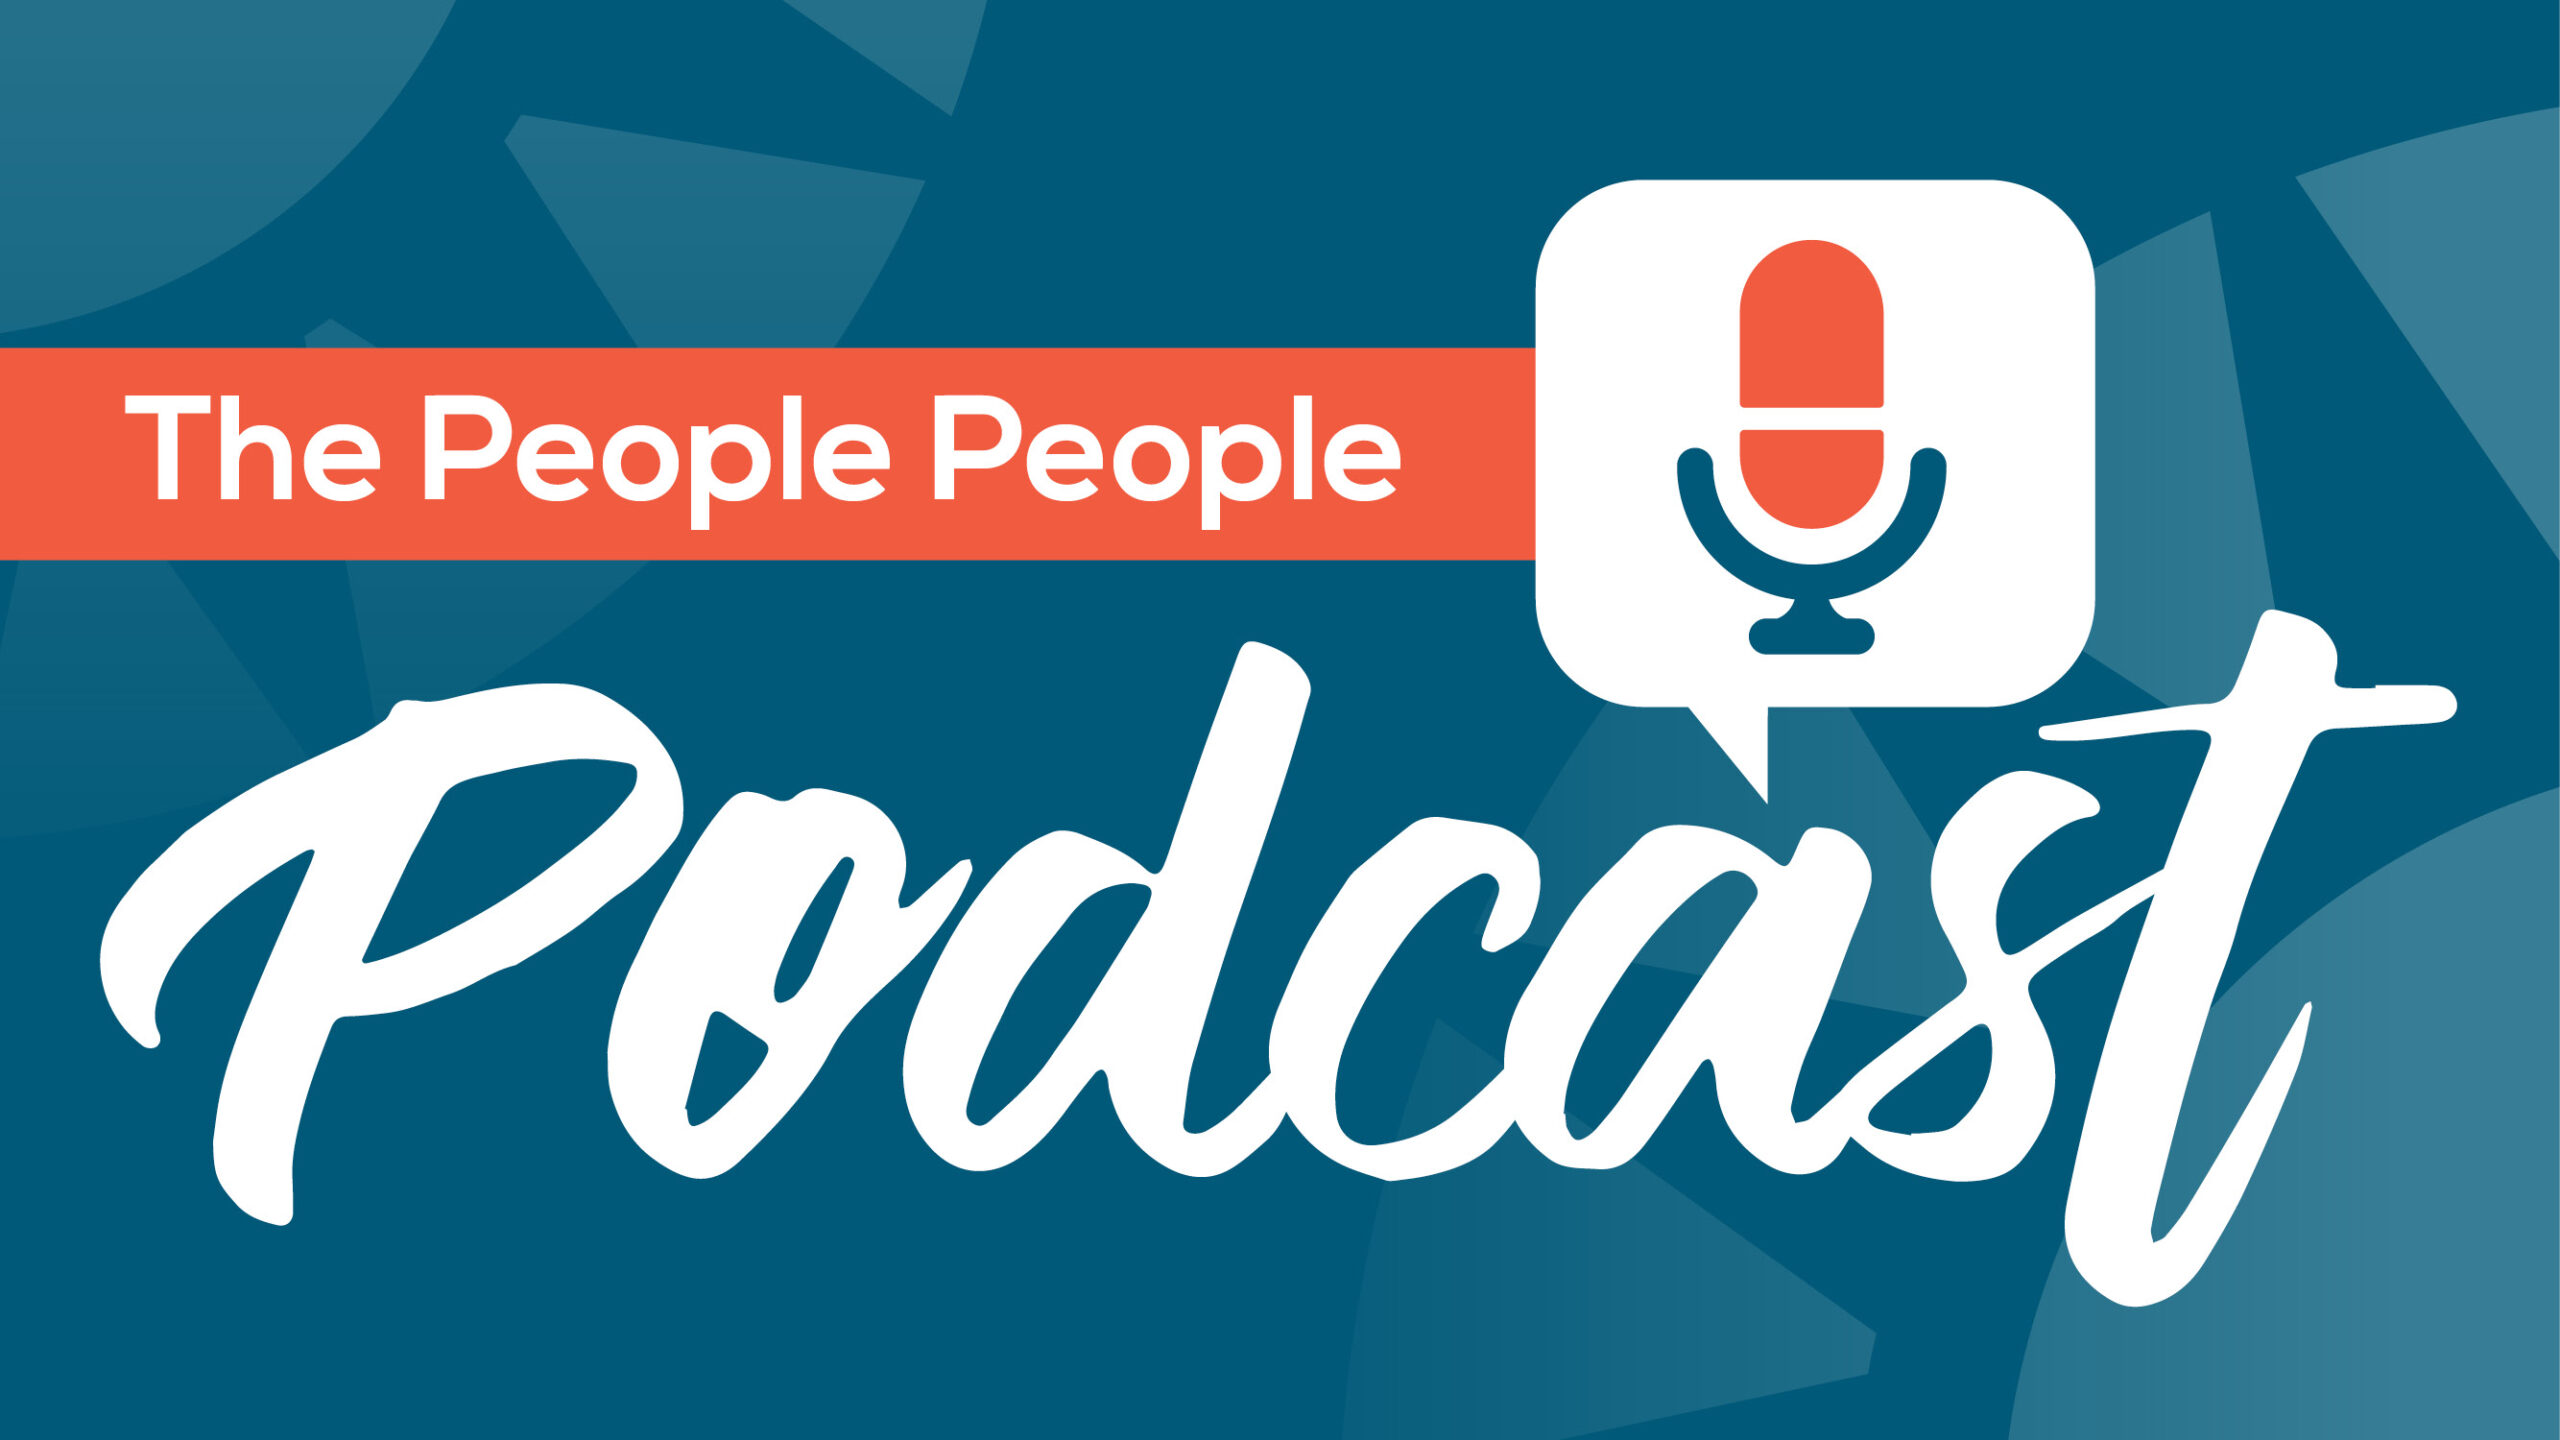 ART_PHMIC_Email_People People Podcast